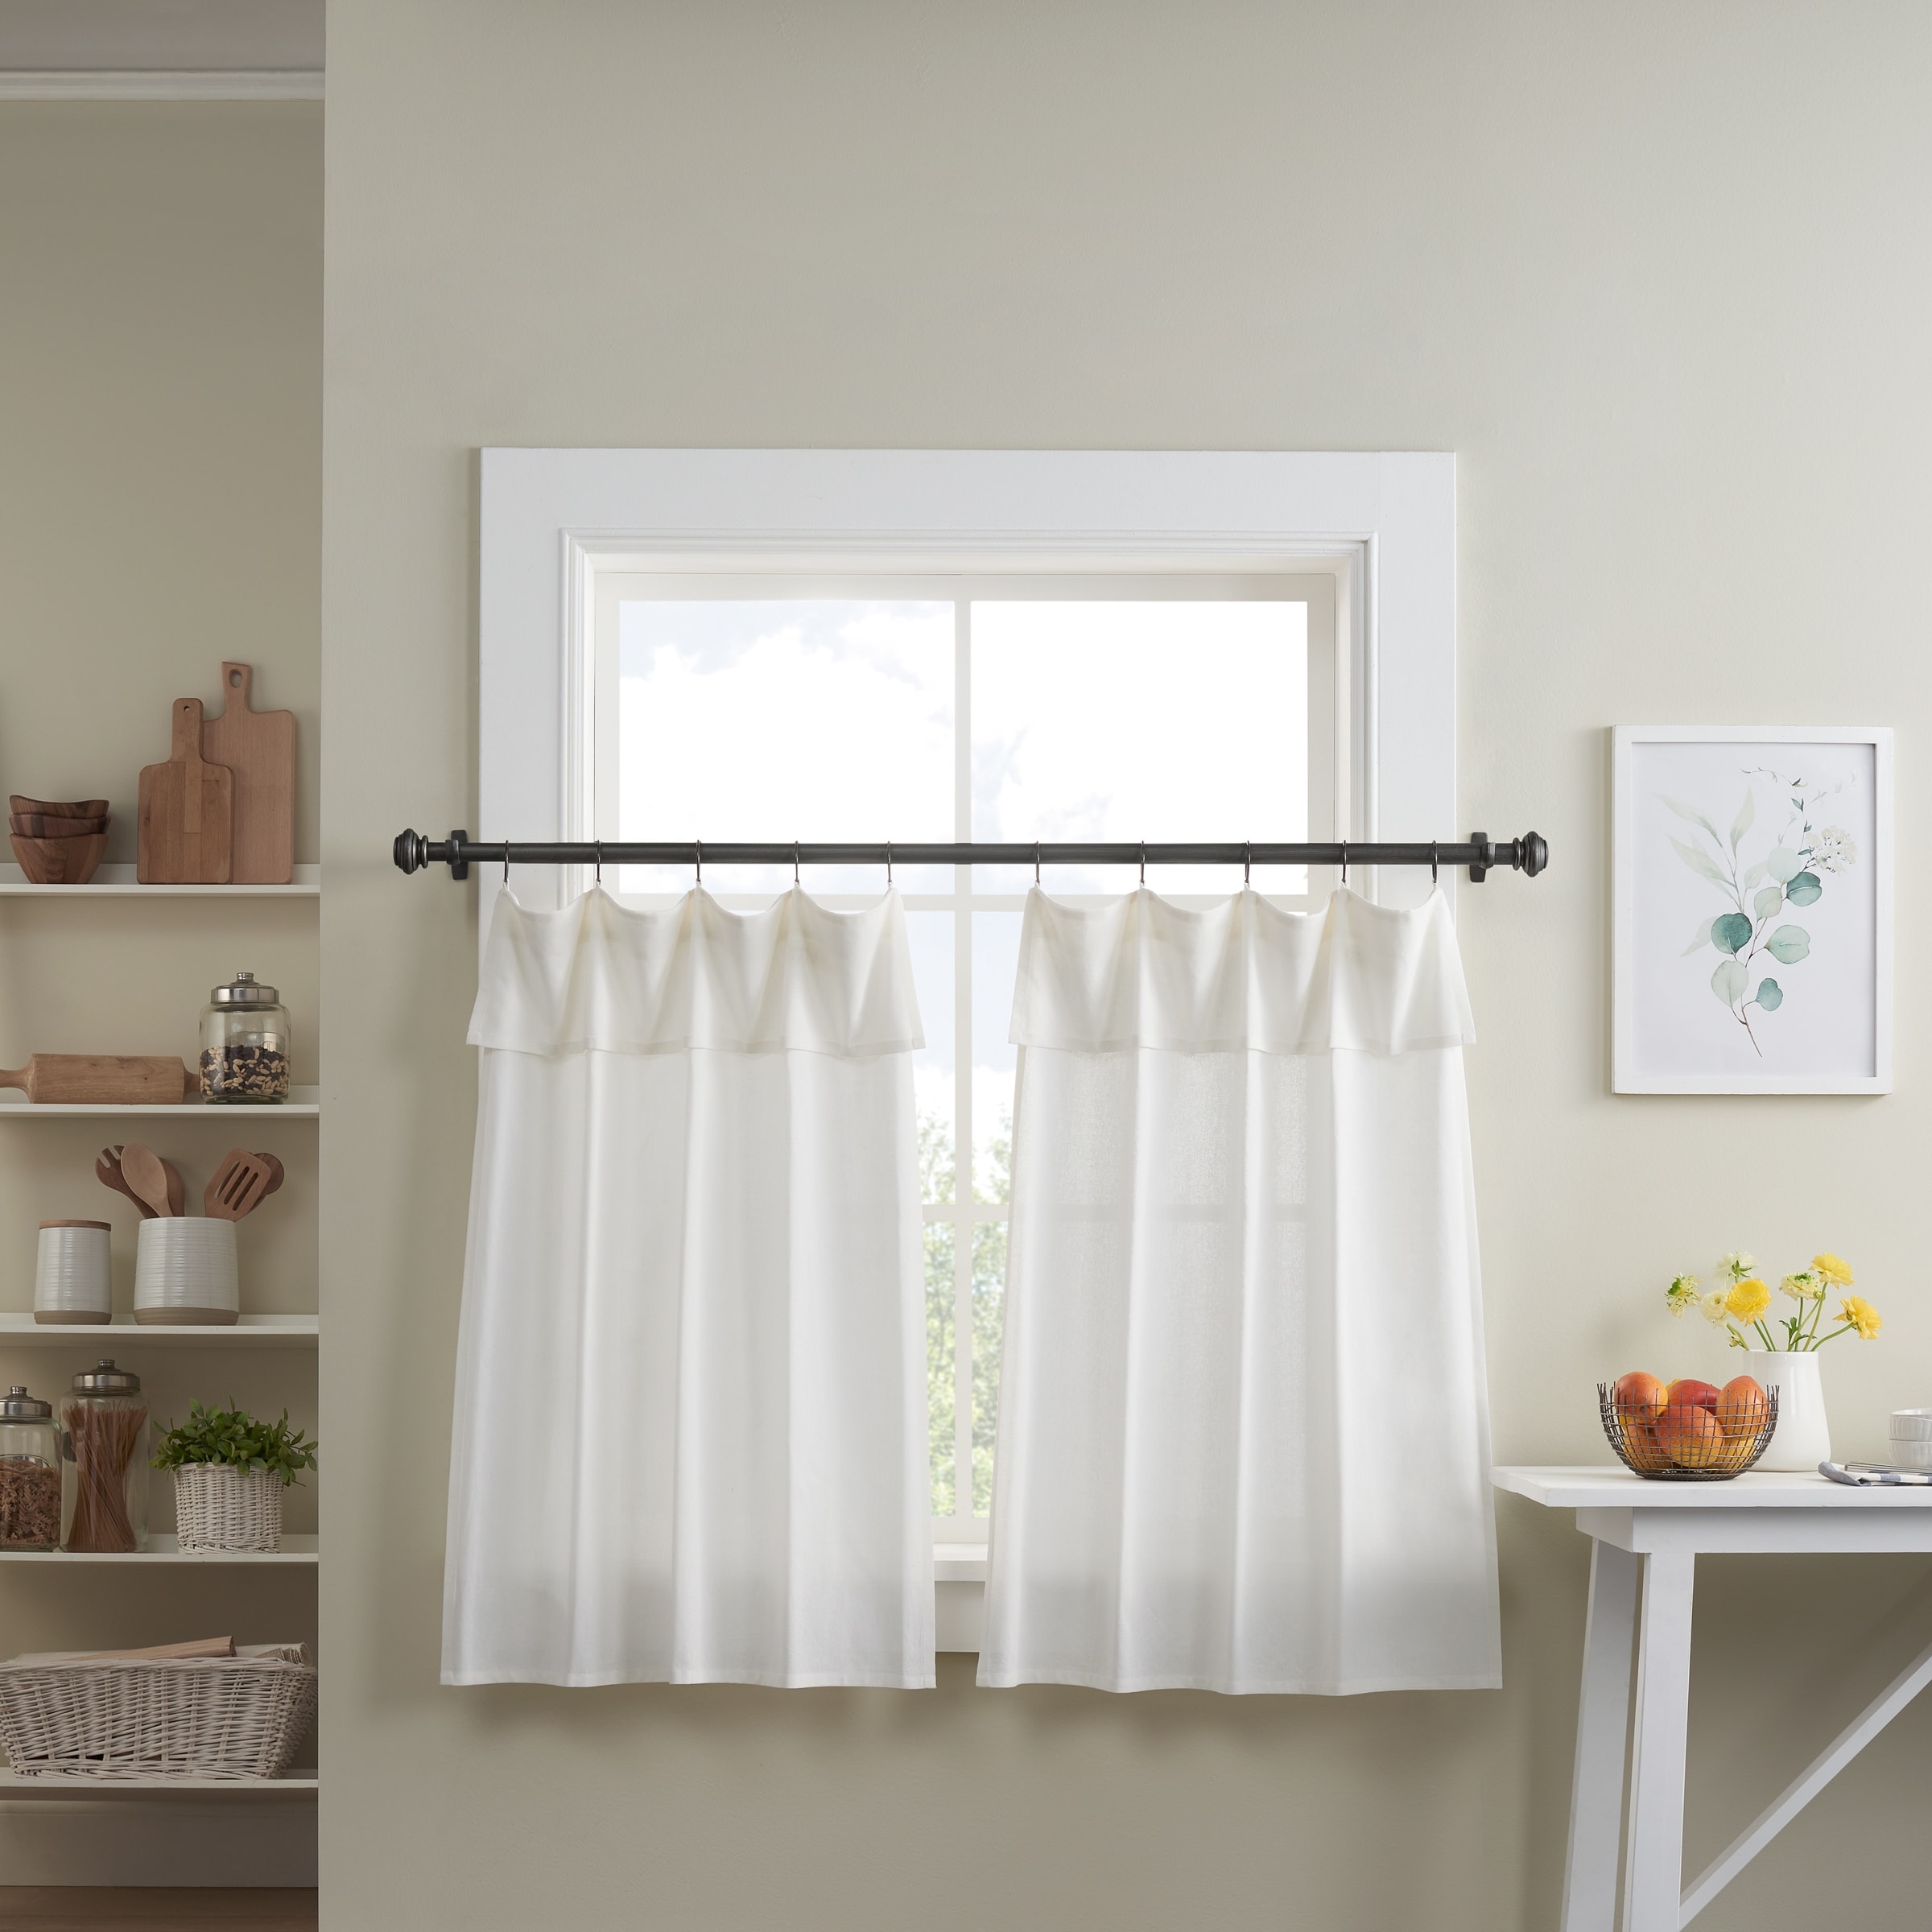 https://ak1.ostkcdn.com/images/products/is/images/direct/f00d6ddfe031184c6e0f9fb2ea1bddcdb4b06ece/Mercantile-Drop-Cloth-Tier-Curtain-Panel-Pair-with-Valance%2C-Light-Filtering-Ring-and-Tab-Top%2C-36x30.jpg